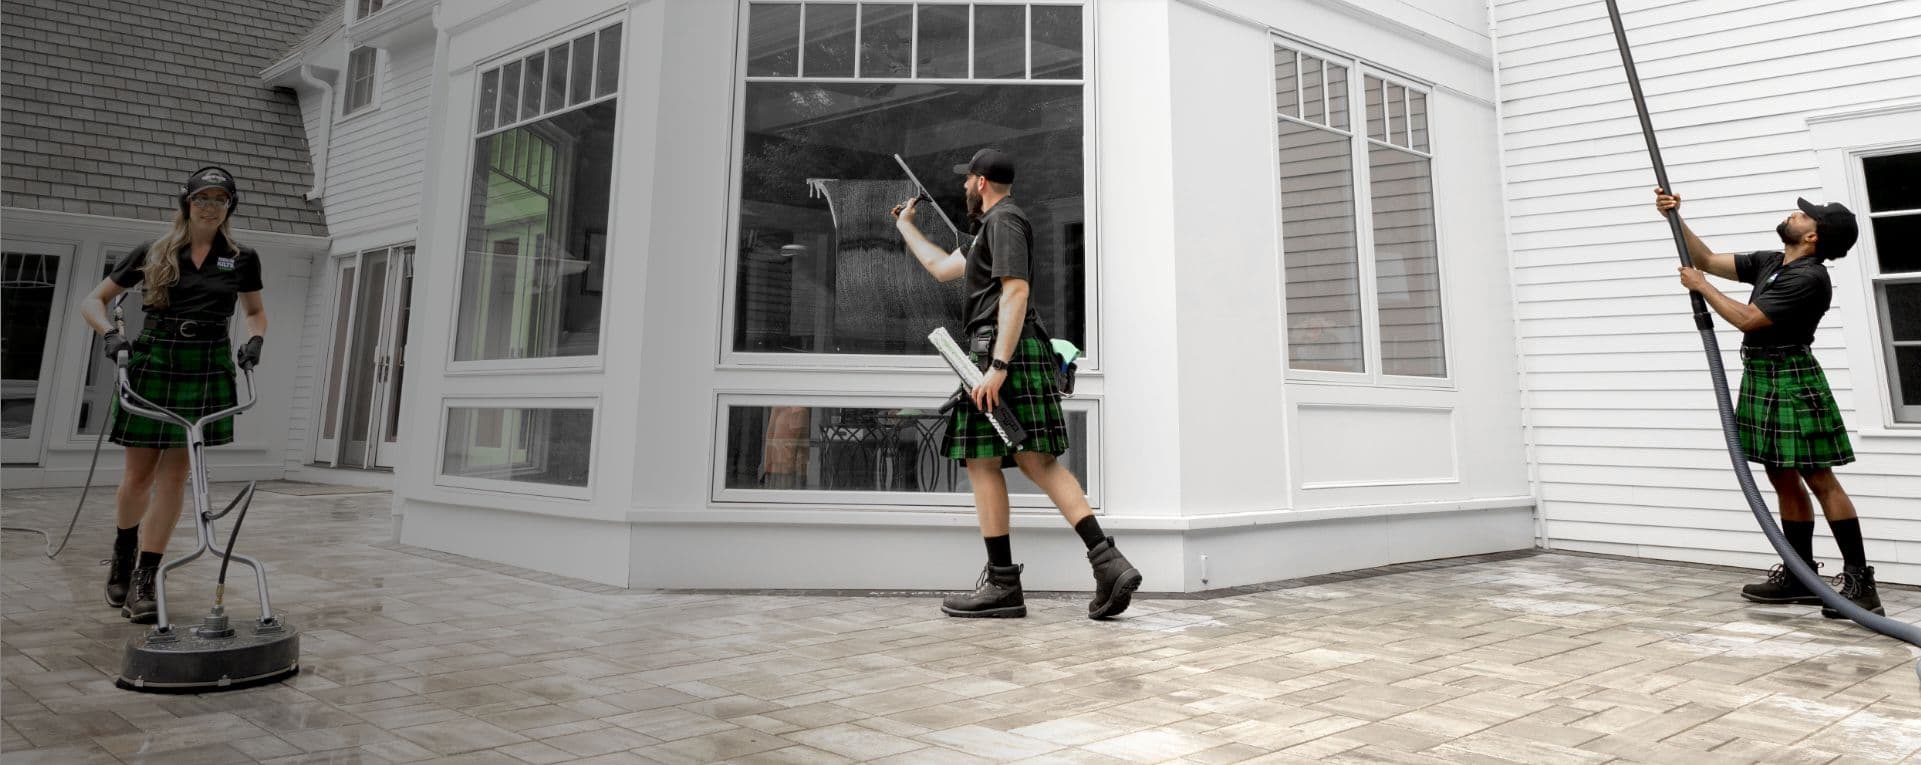 Window Cleaning and More Men In Kilts photo